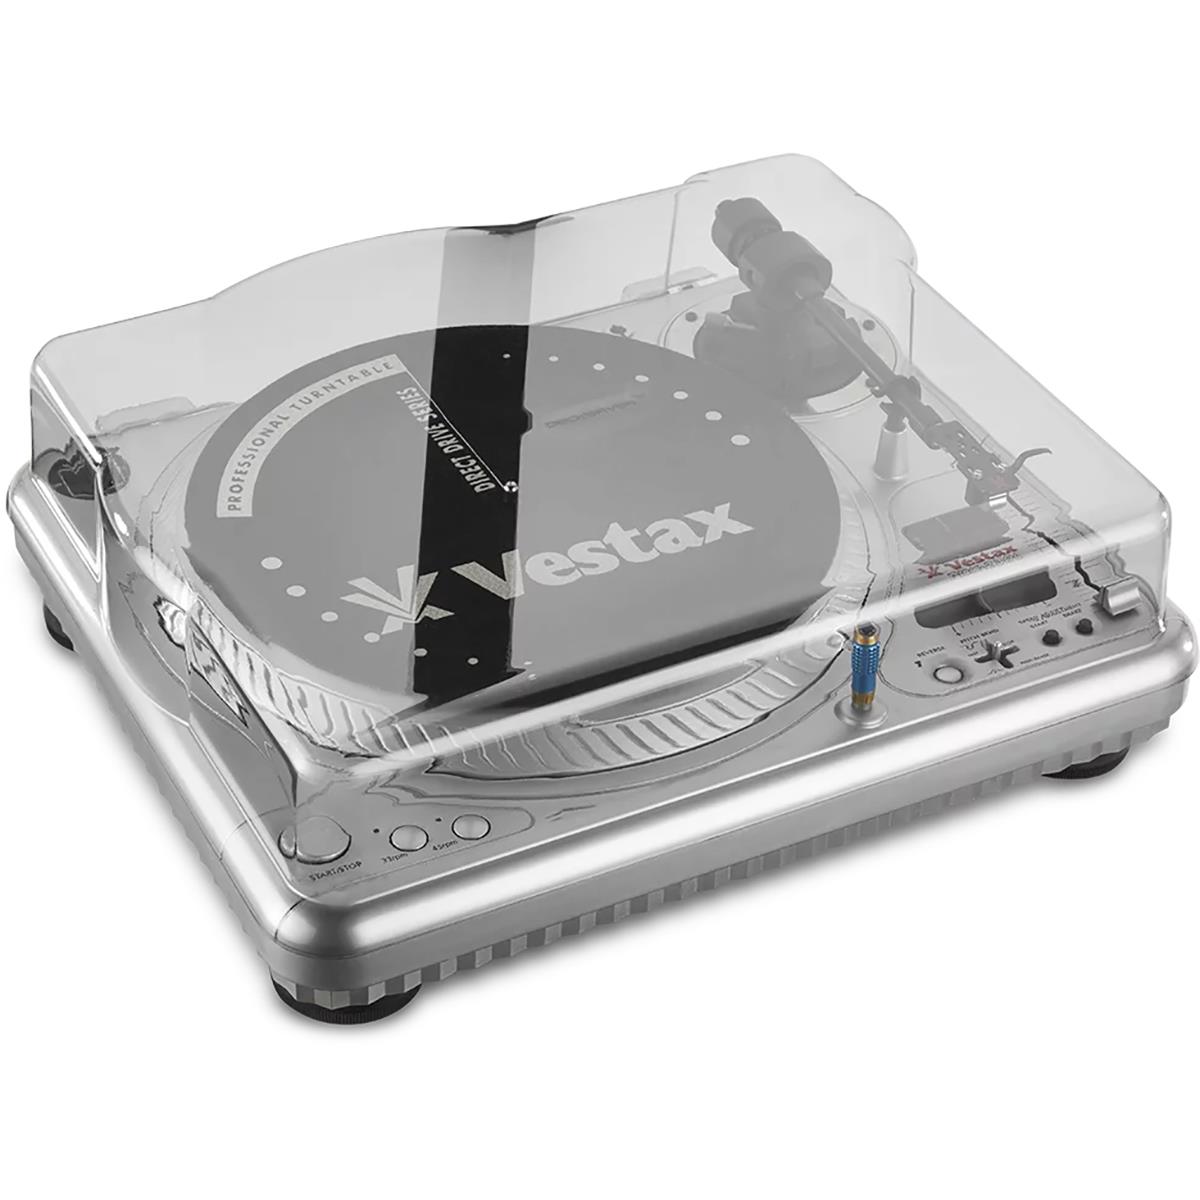 Image of Decksaver Cover for Vestax PDX-2000 and PDX-3000 Turntables